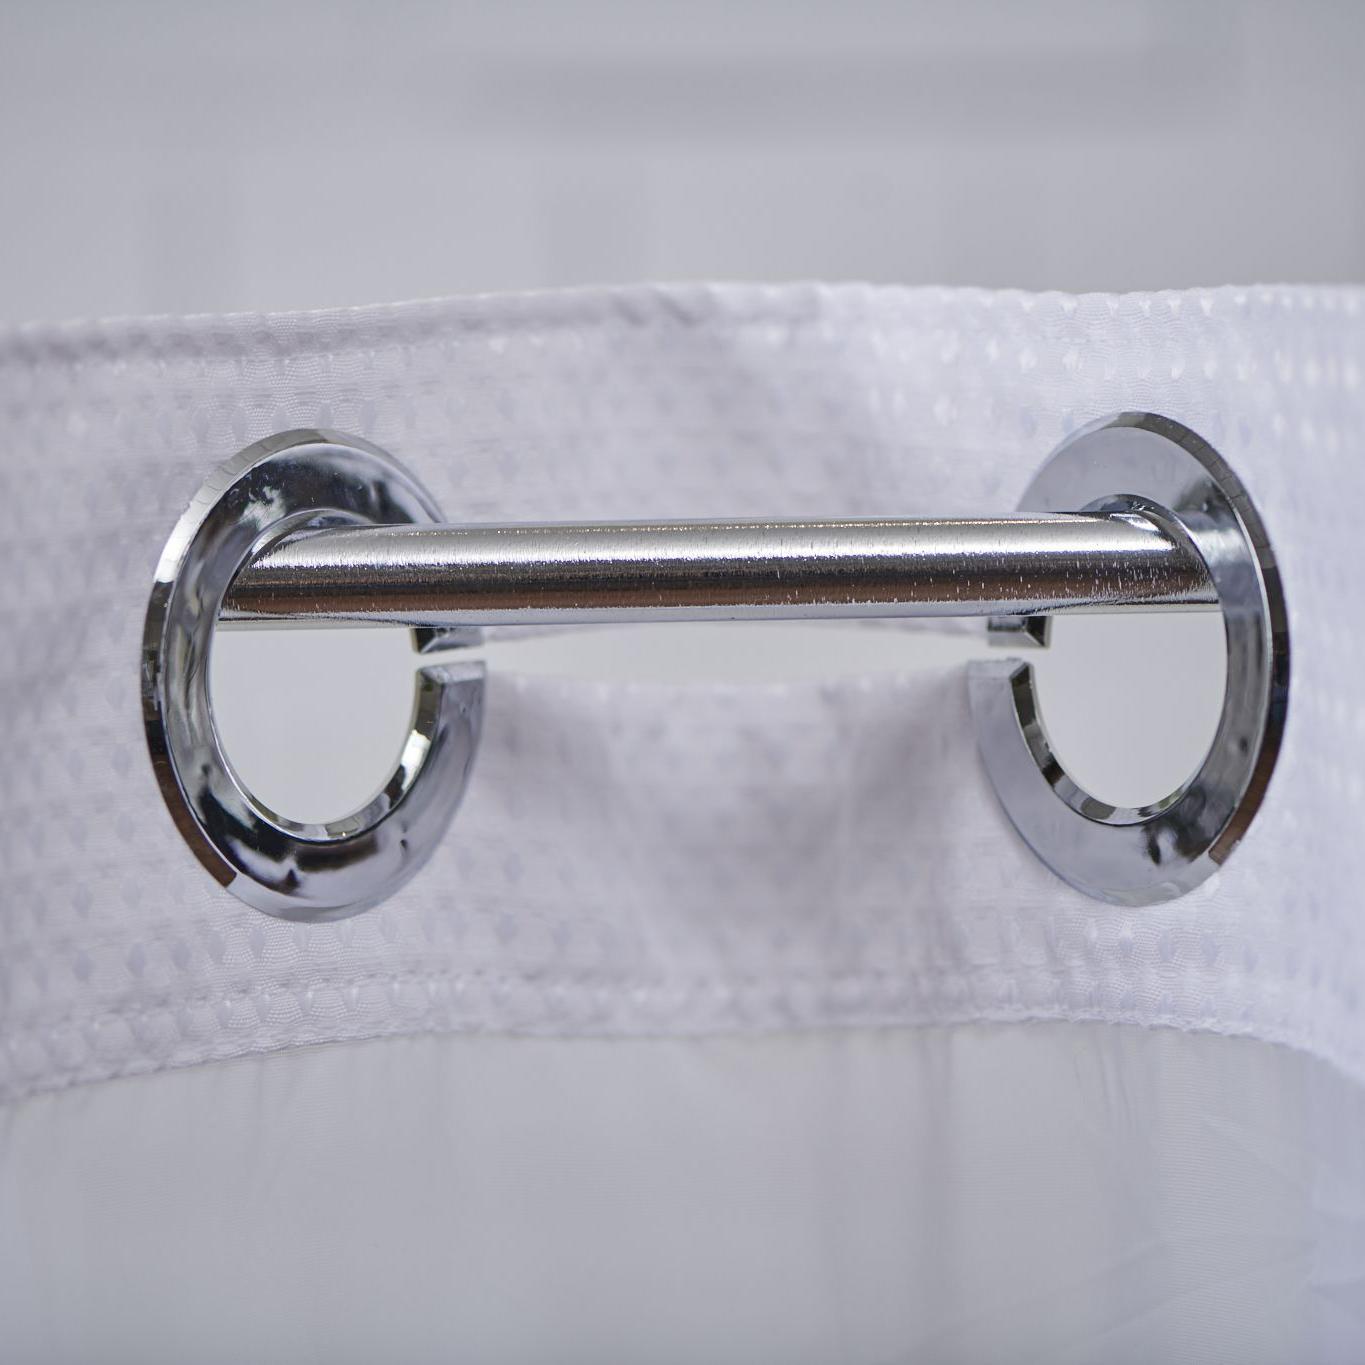 A Close Up Look on Hook-Free Shower Curtains